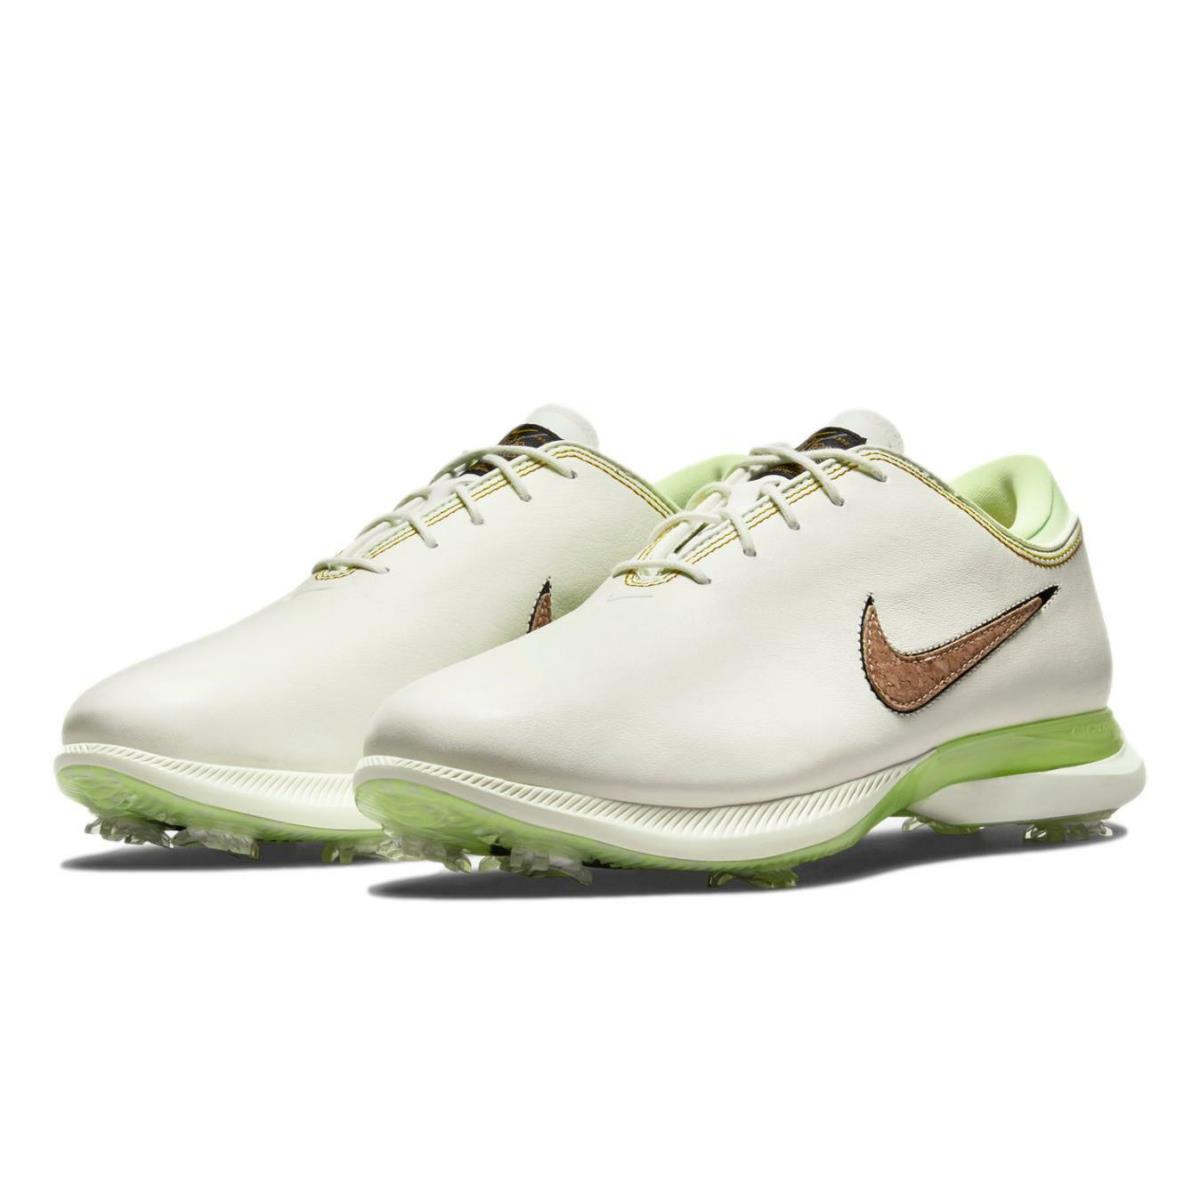 Nike Air Zoom Victory Tour Nrg 2 `cork` Golf Shoes Cleats DB4543-100